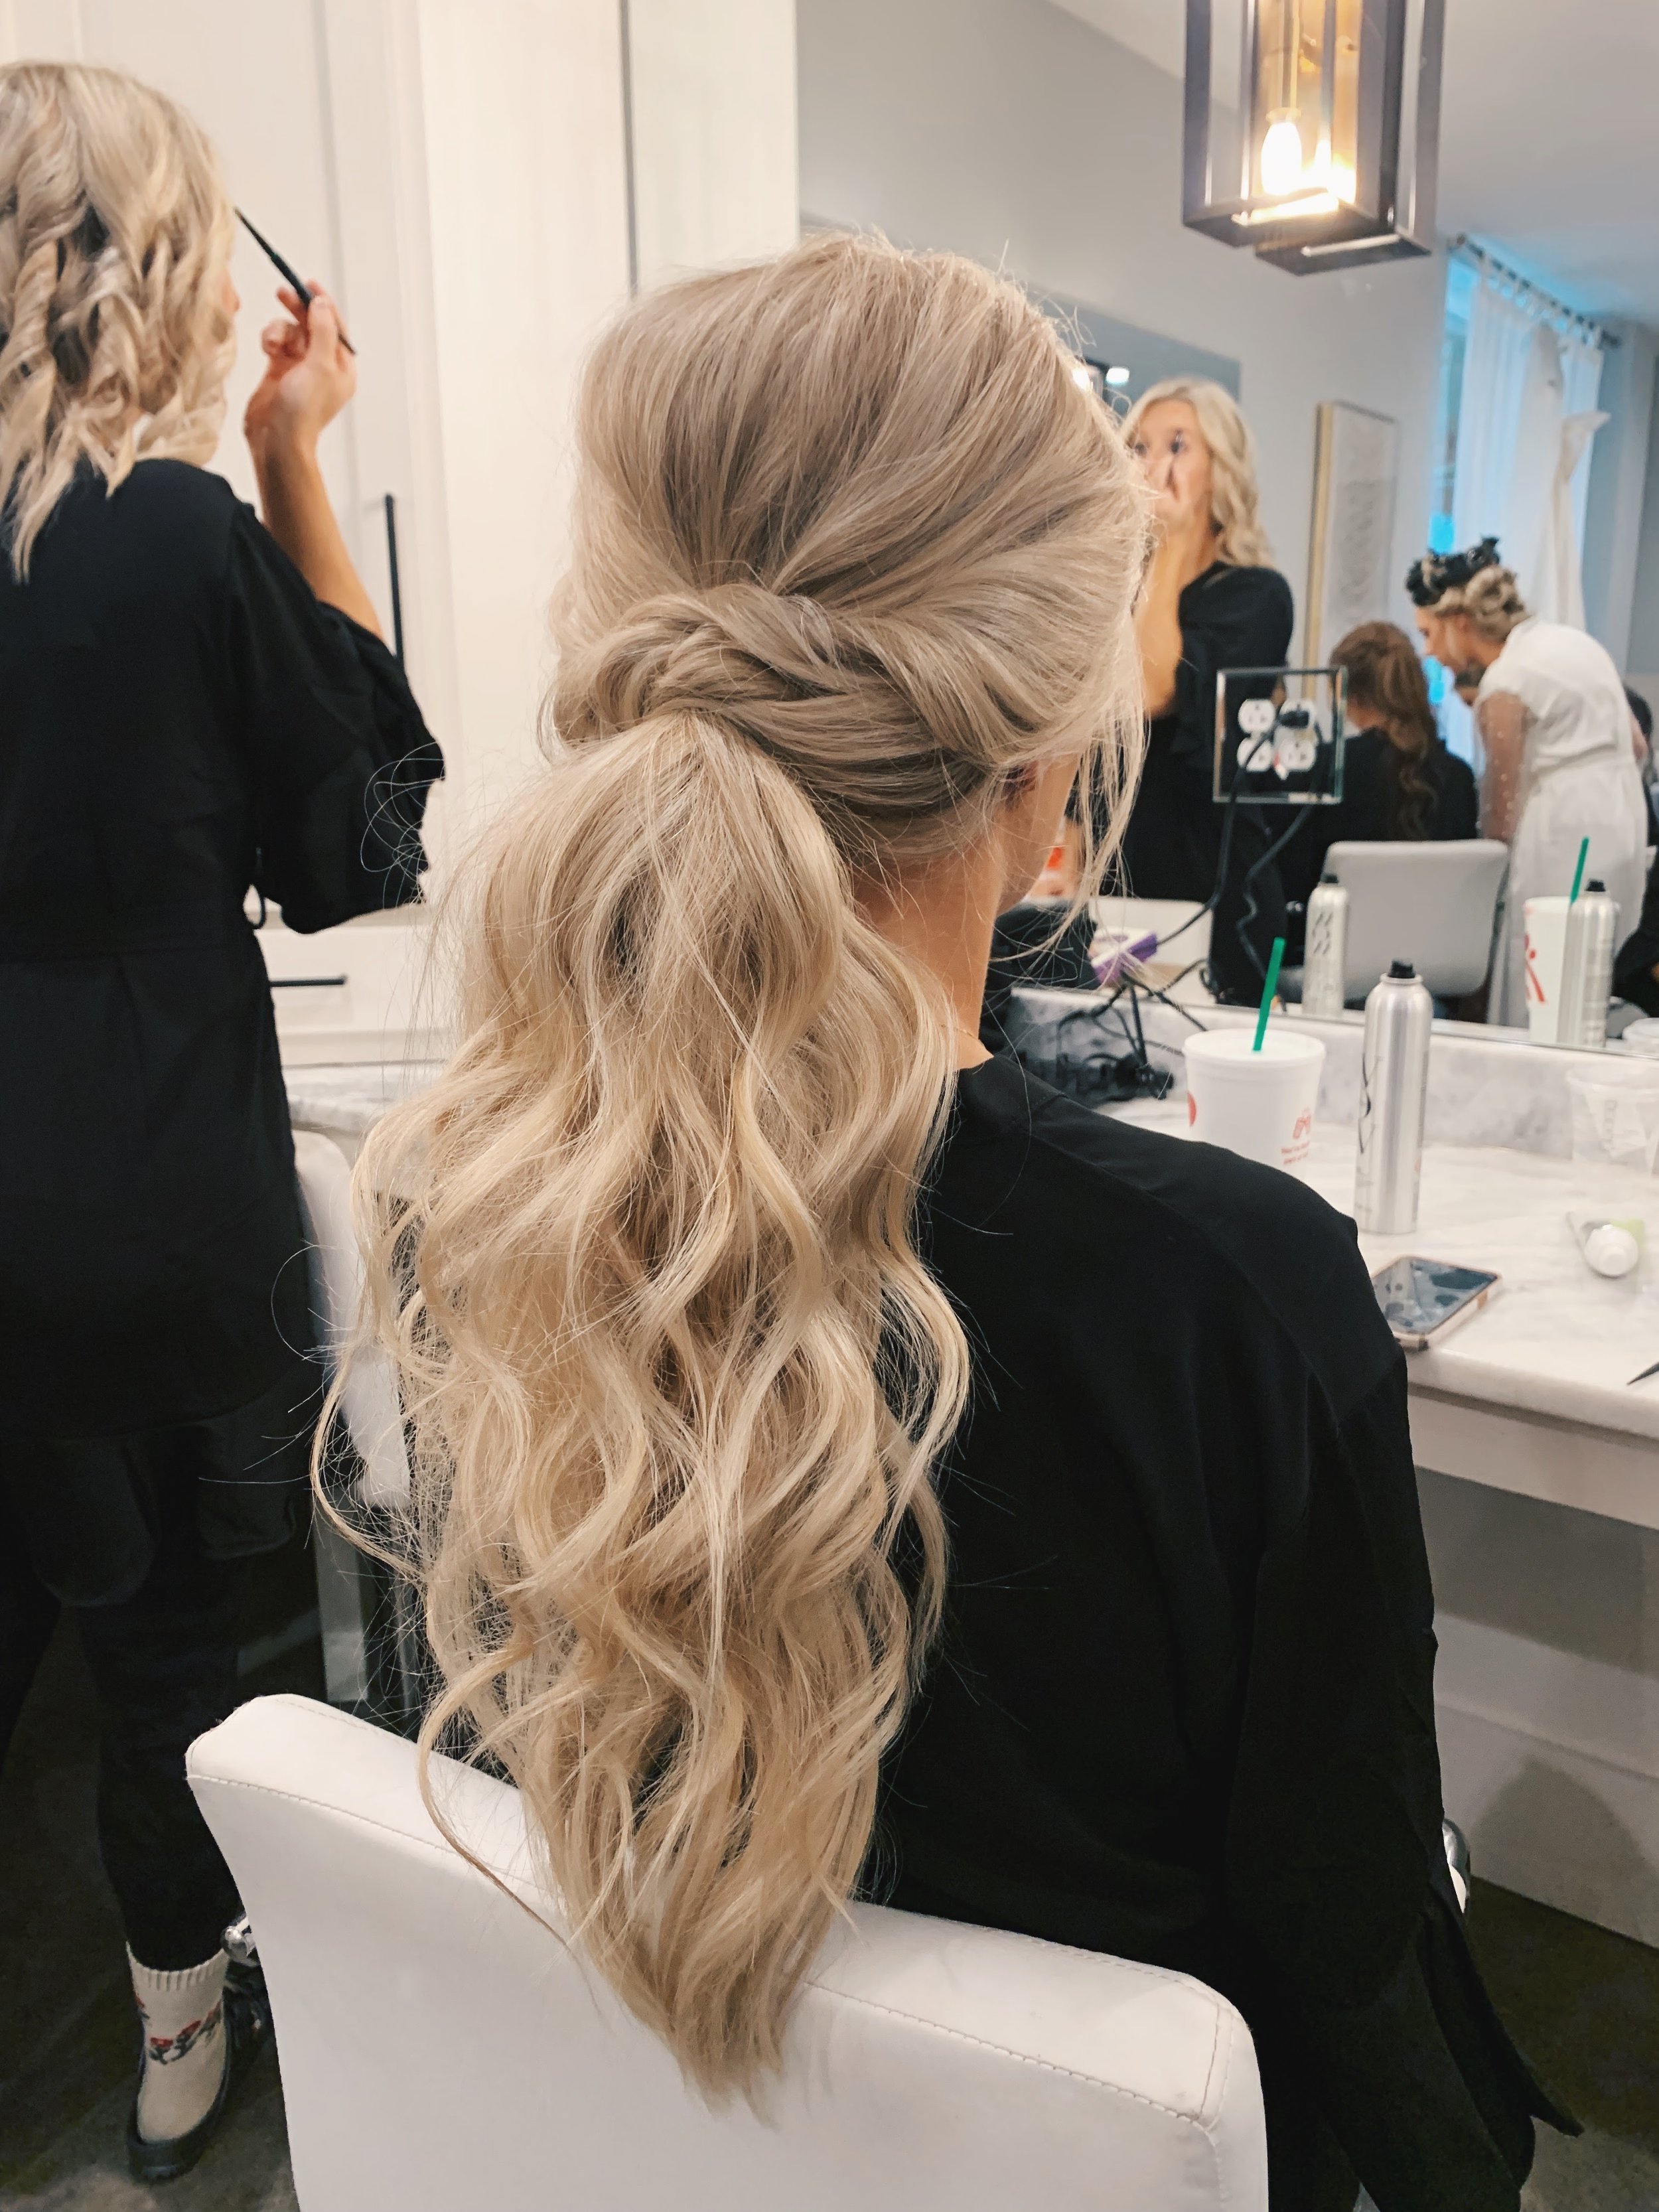 17 Stylish Hairstyles To Rock At Your Sister's Intimate Wedding | Messy  braided hairstyles, Stylish hair, Bridal hair buns